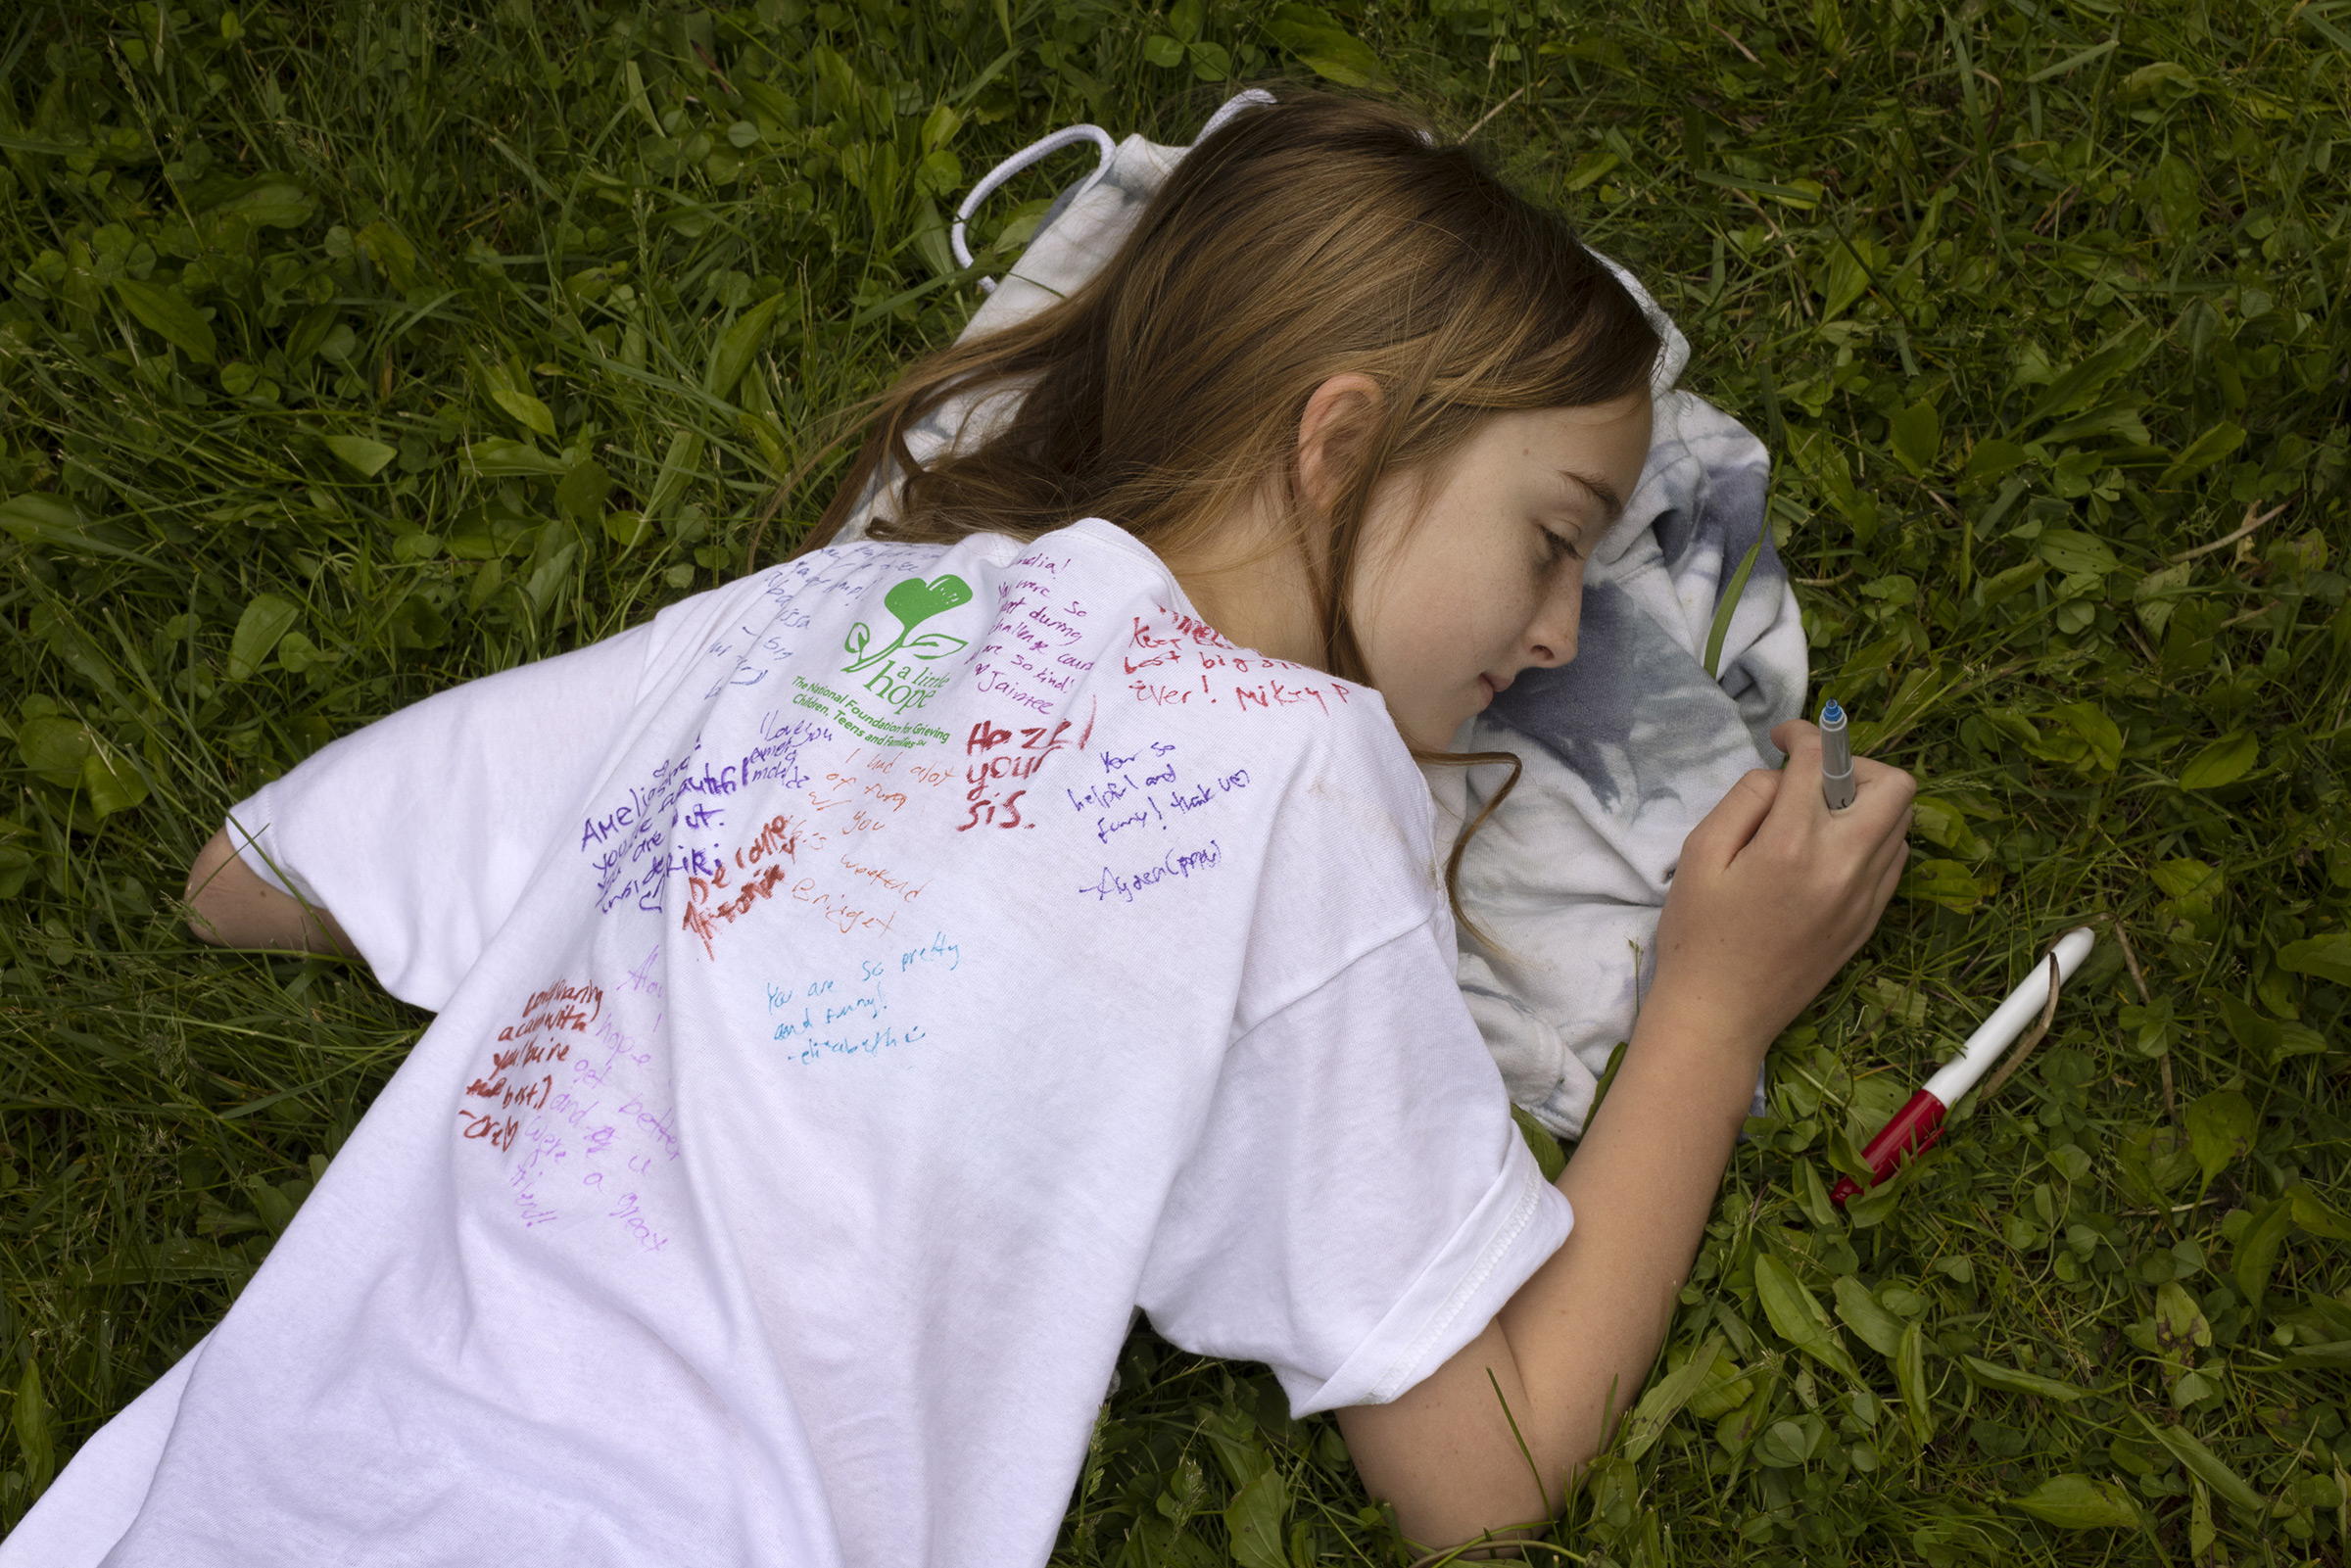 On the last day of Comfort Zone Camp, kids sign one another's shirts. Pictured here is camper Amelia Smith.